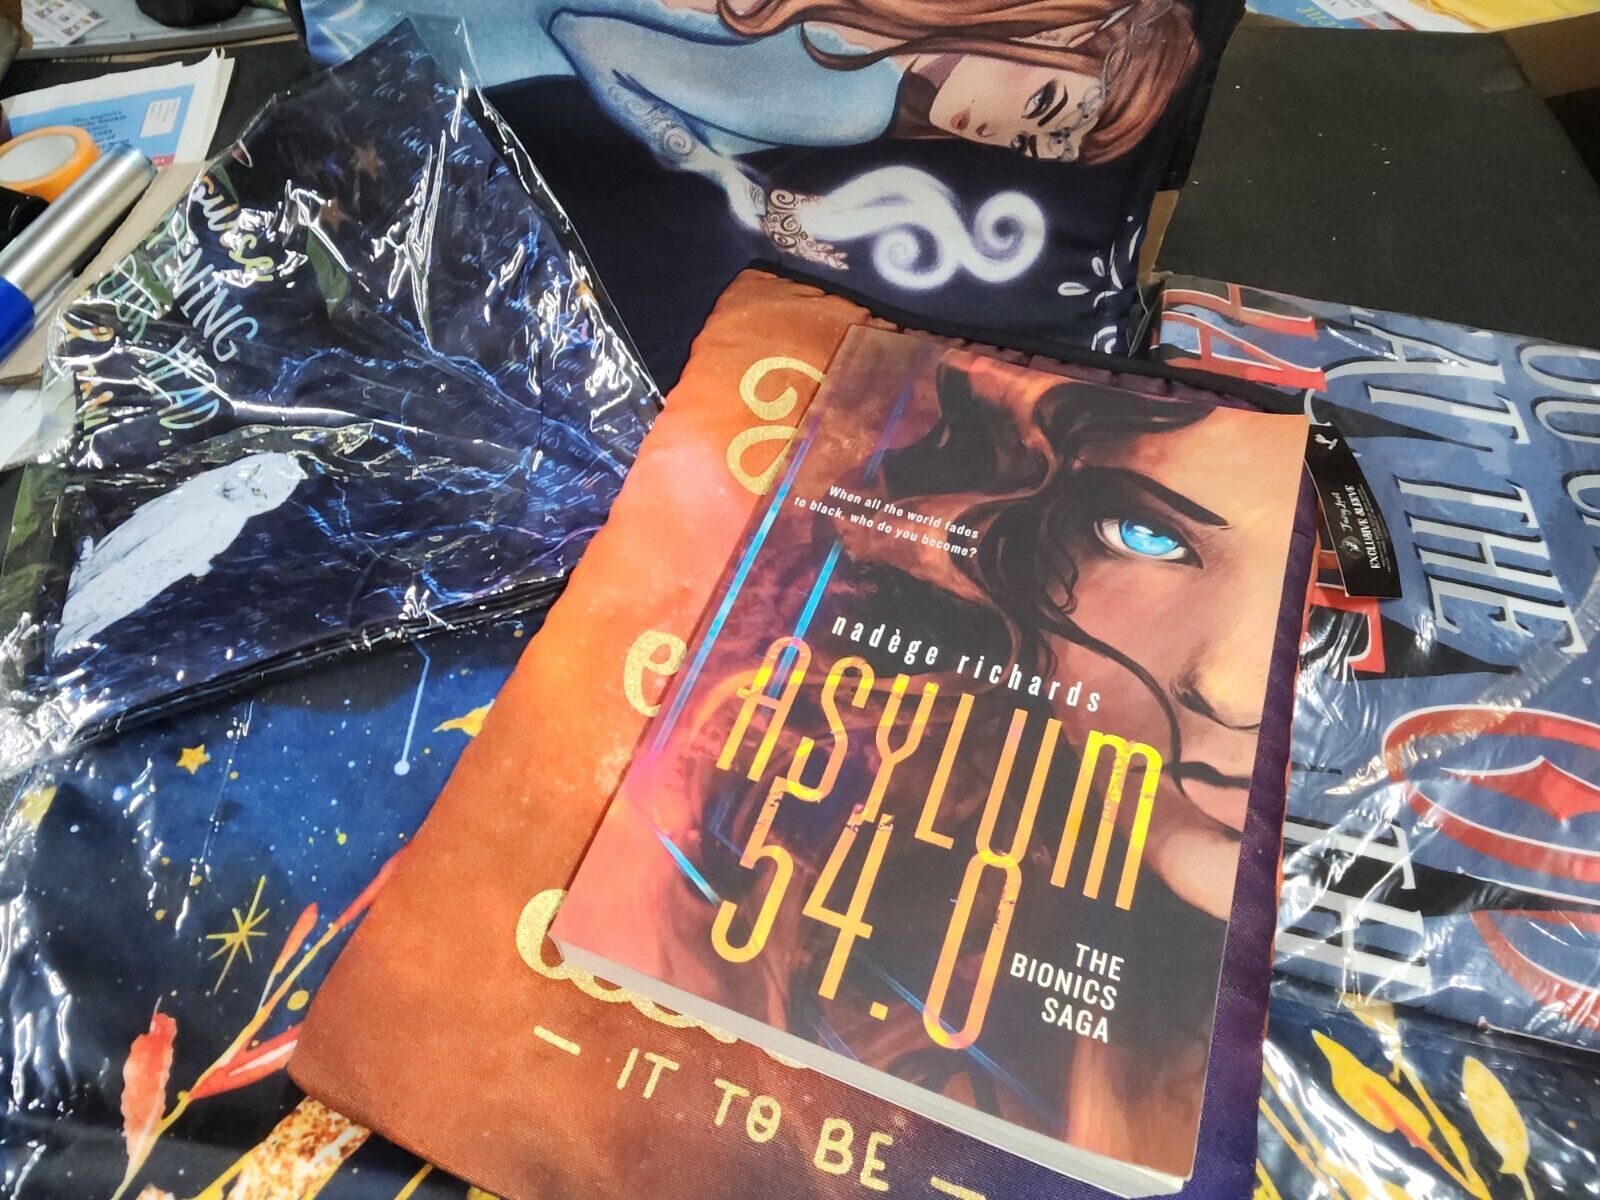 Owlcrate Bookish Box Of Collectibles\Book-sleeves\ plus ASYLUM 54.0 - N.RICHARDS